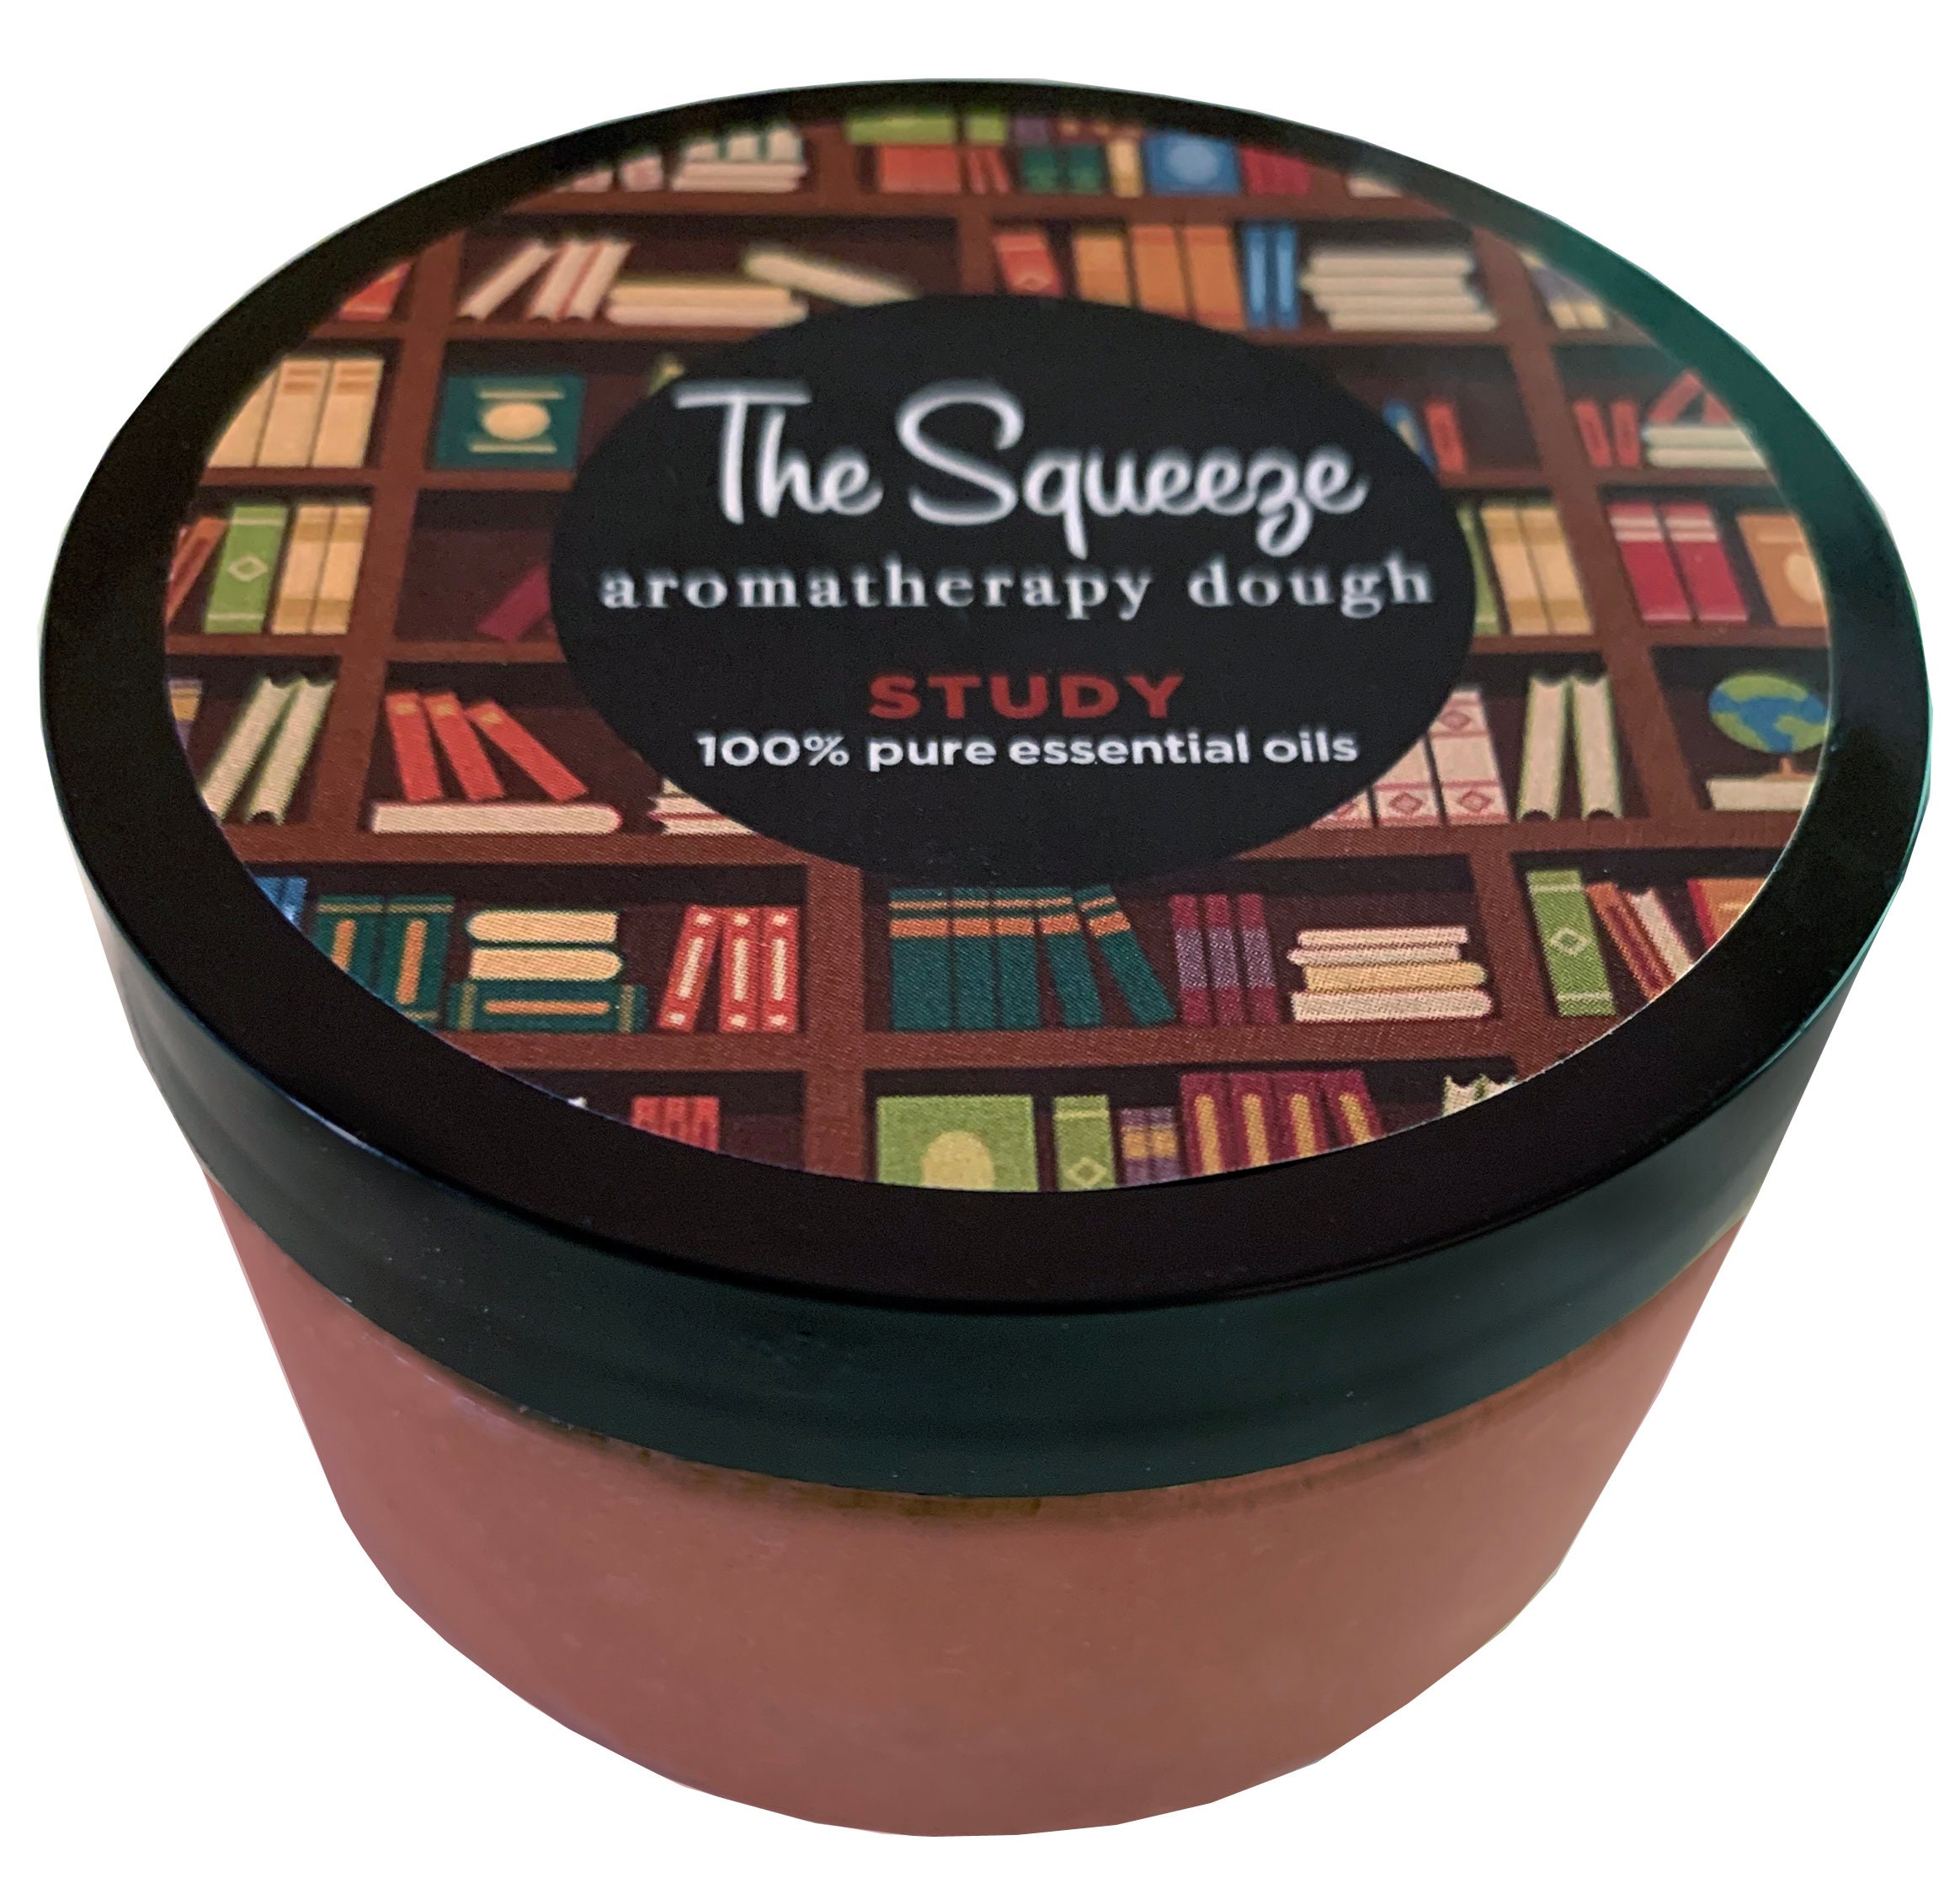 The Squeeze Study Blend Therapy Aromatherapy Dough For Focus & Concentration Stress Ball Anxiety